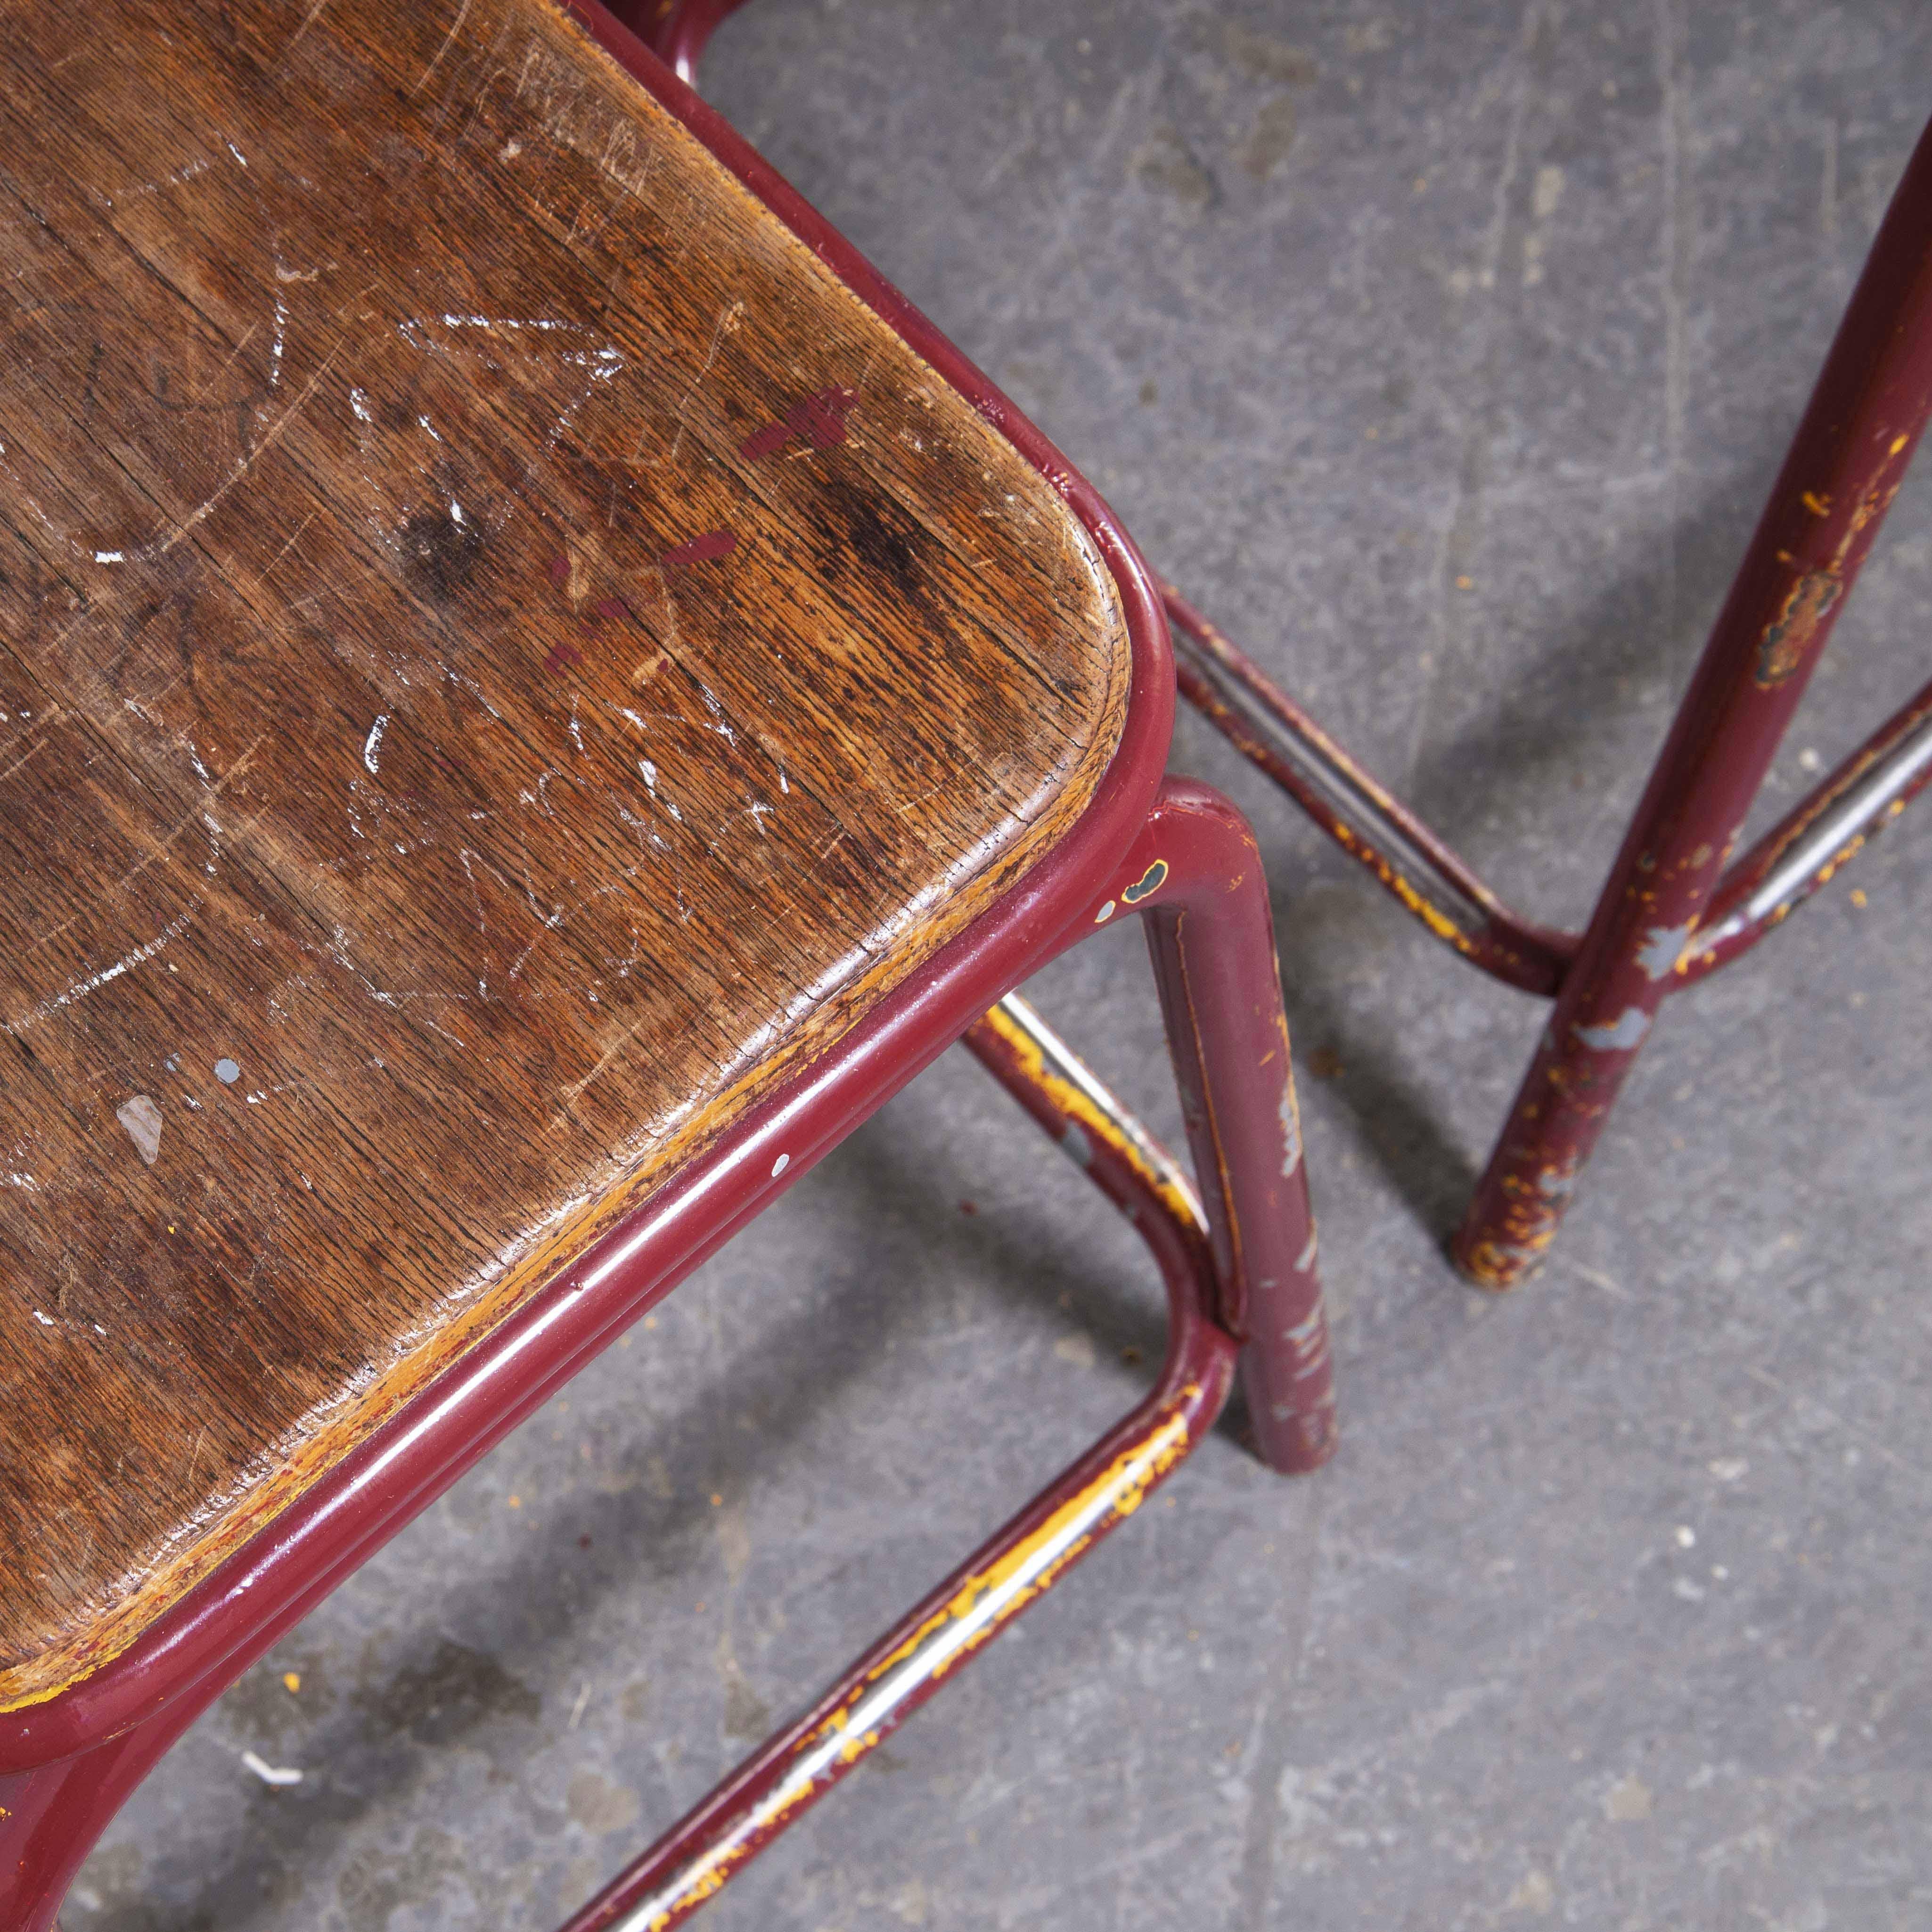 1950?s Mullca industrial French stacking red stools – set of four
1950?s Mullca industrial French stacking red stools – set of four. We are huge fans of the French company Mullca and these wonderful stools in wonderful aged condition, are getting